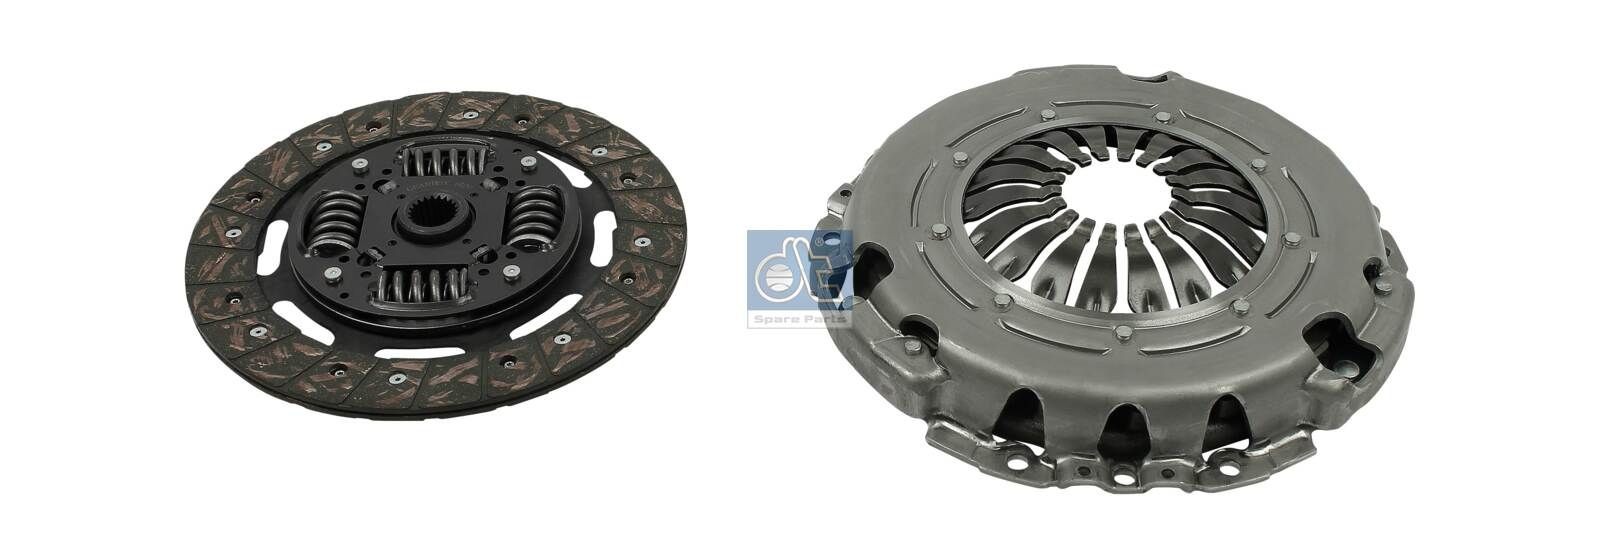 Original DT Spare Parts 3000 950 651 Clutch and flywheel kit 6.93046 for RENAULT MASTER